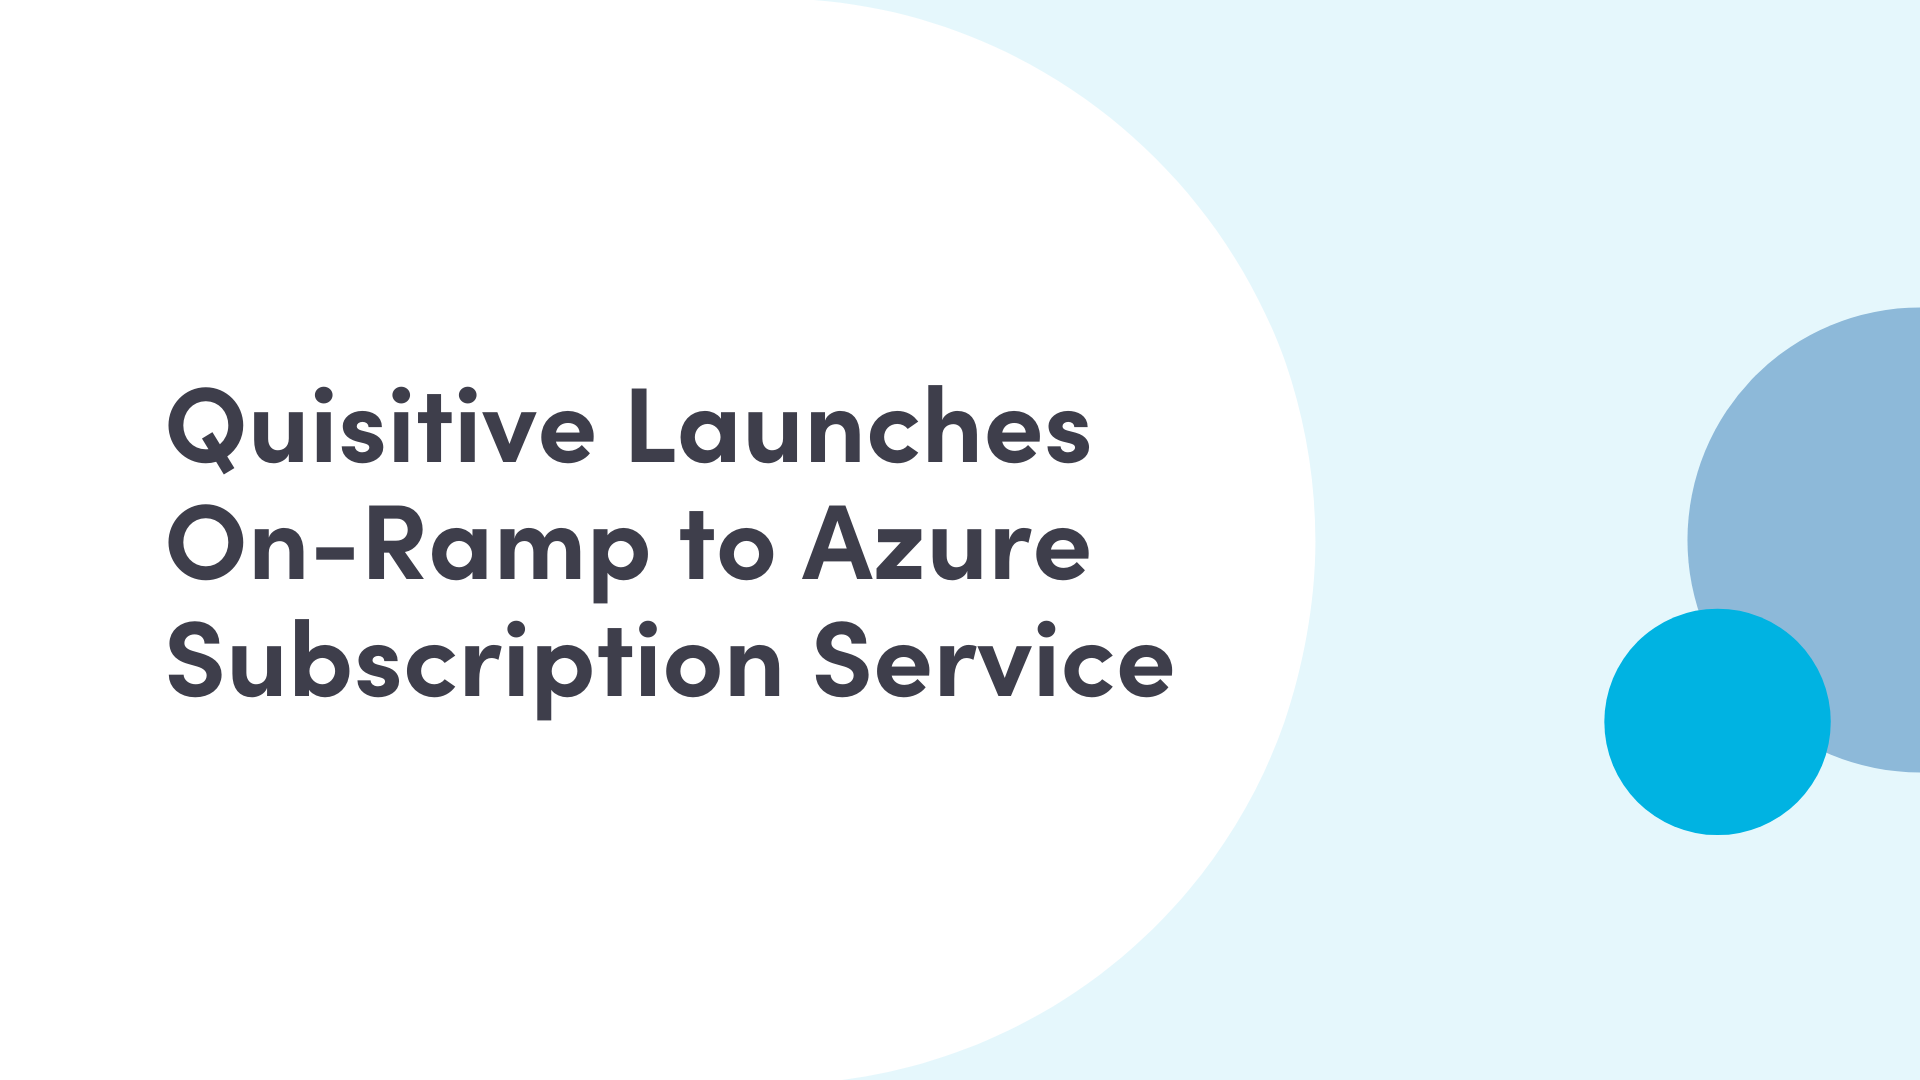 Blue and white background with text "Quisitive Launches On-Ramp to Azure Subscription Service"